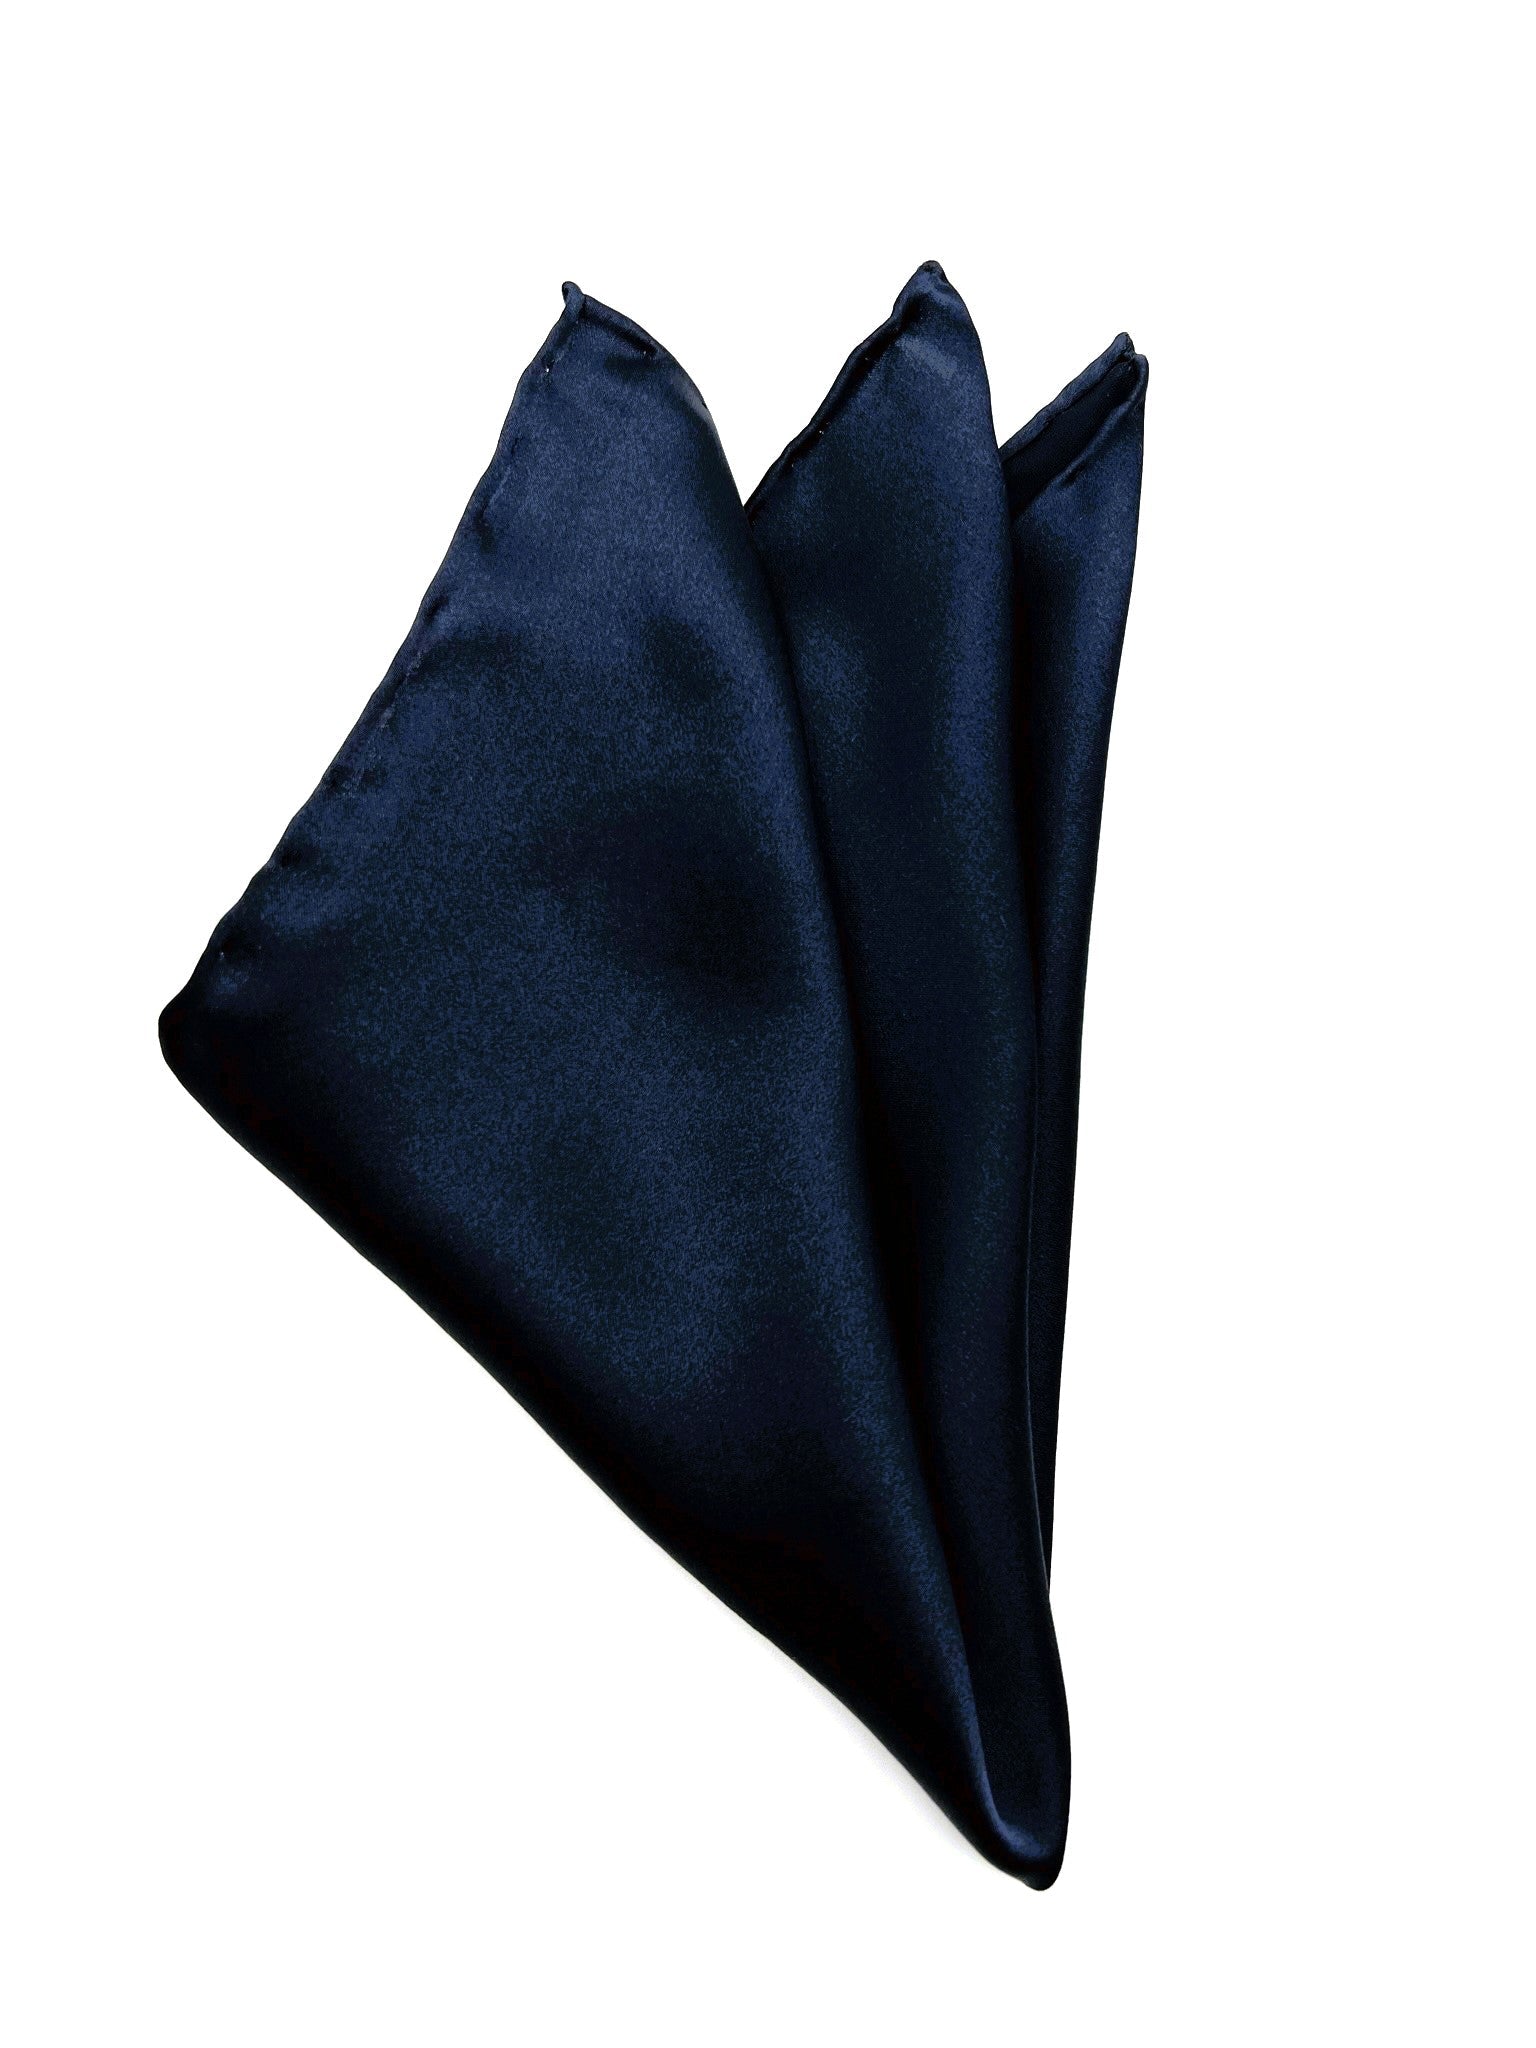 Navy Blue Silk Pocket Square. Handmade in Italy. Pocket Square in 100% pure Italian silk,  hand-finished edges. A must-have accessory for every  man&#39;s wardrobe that can suit either  a classic or sophisticated look.| Sartoria Dei Duchi - Atri